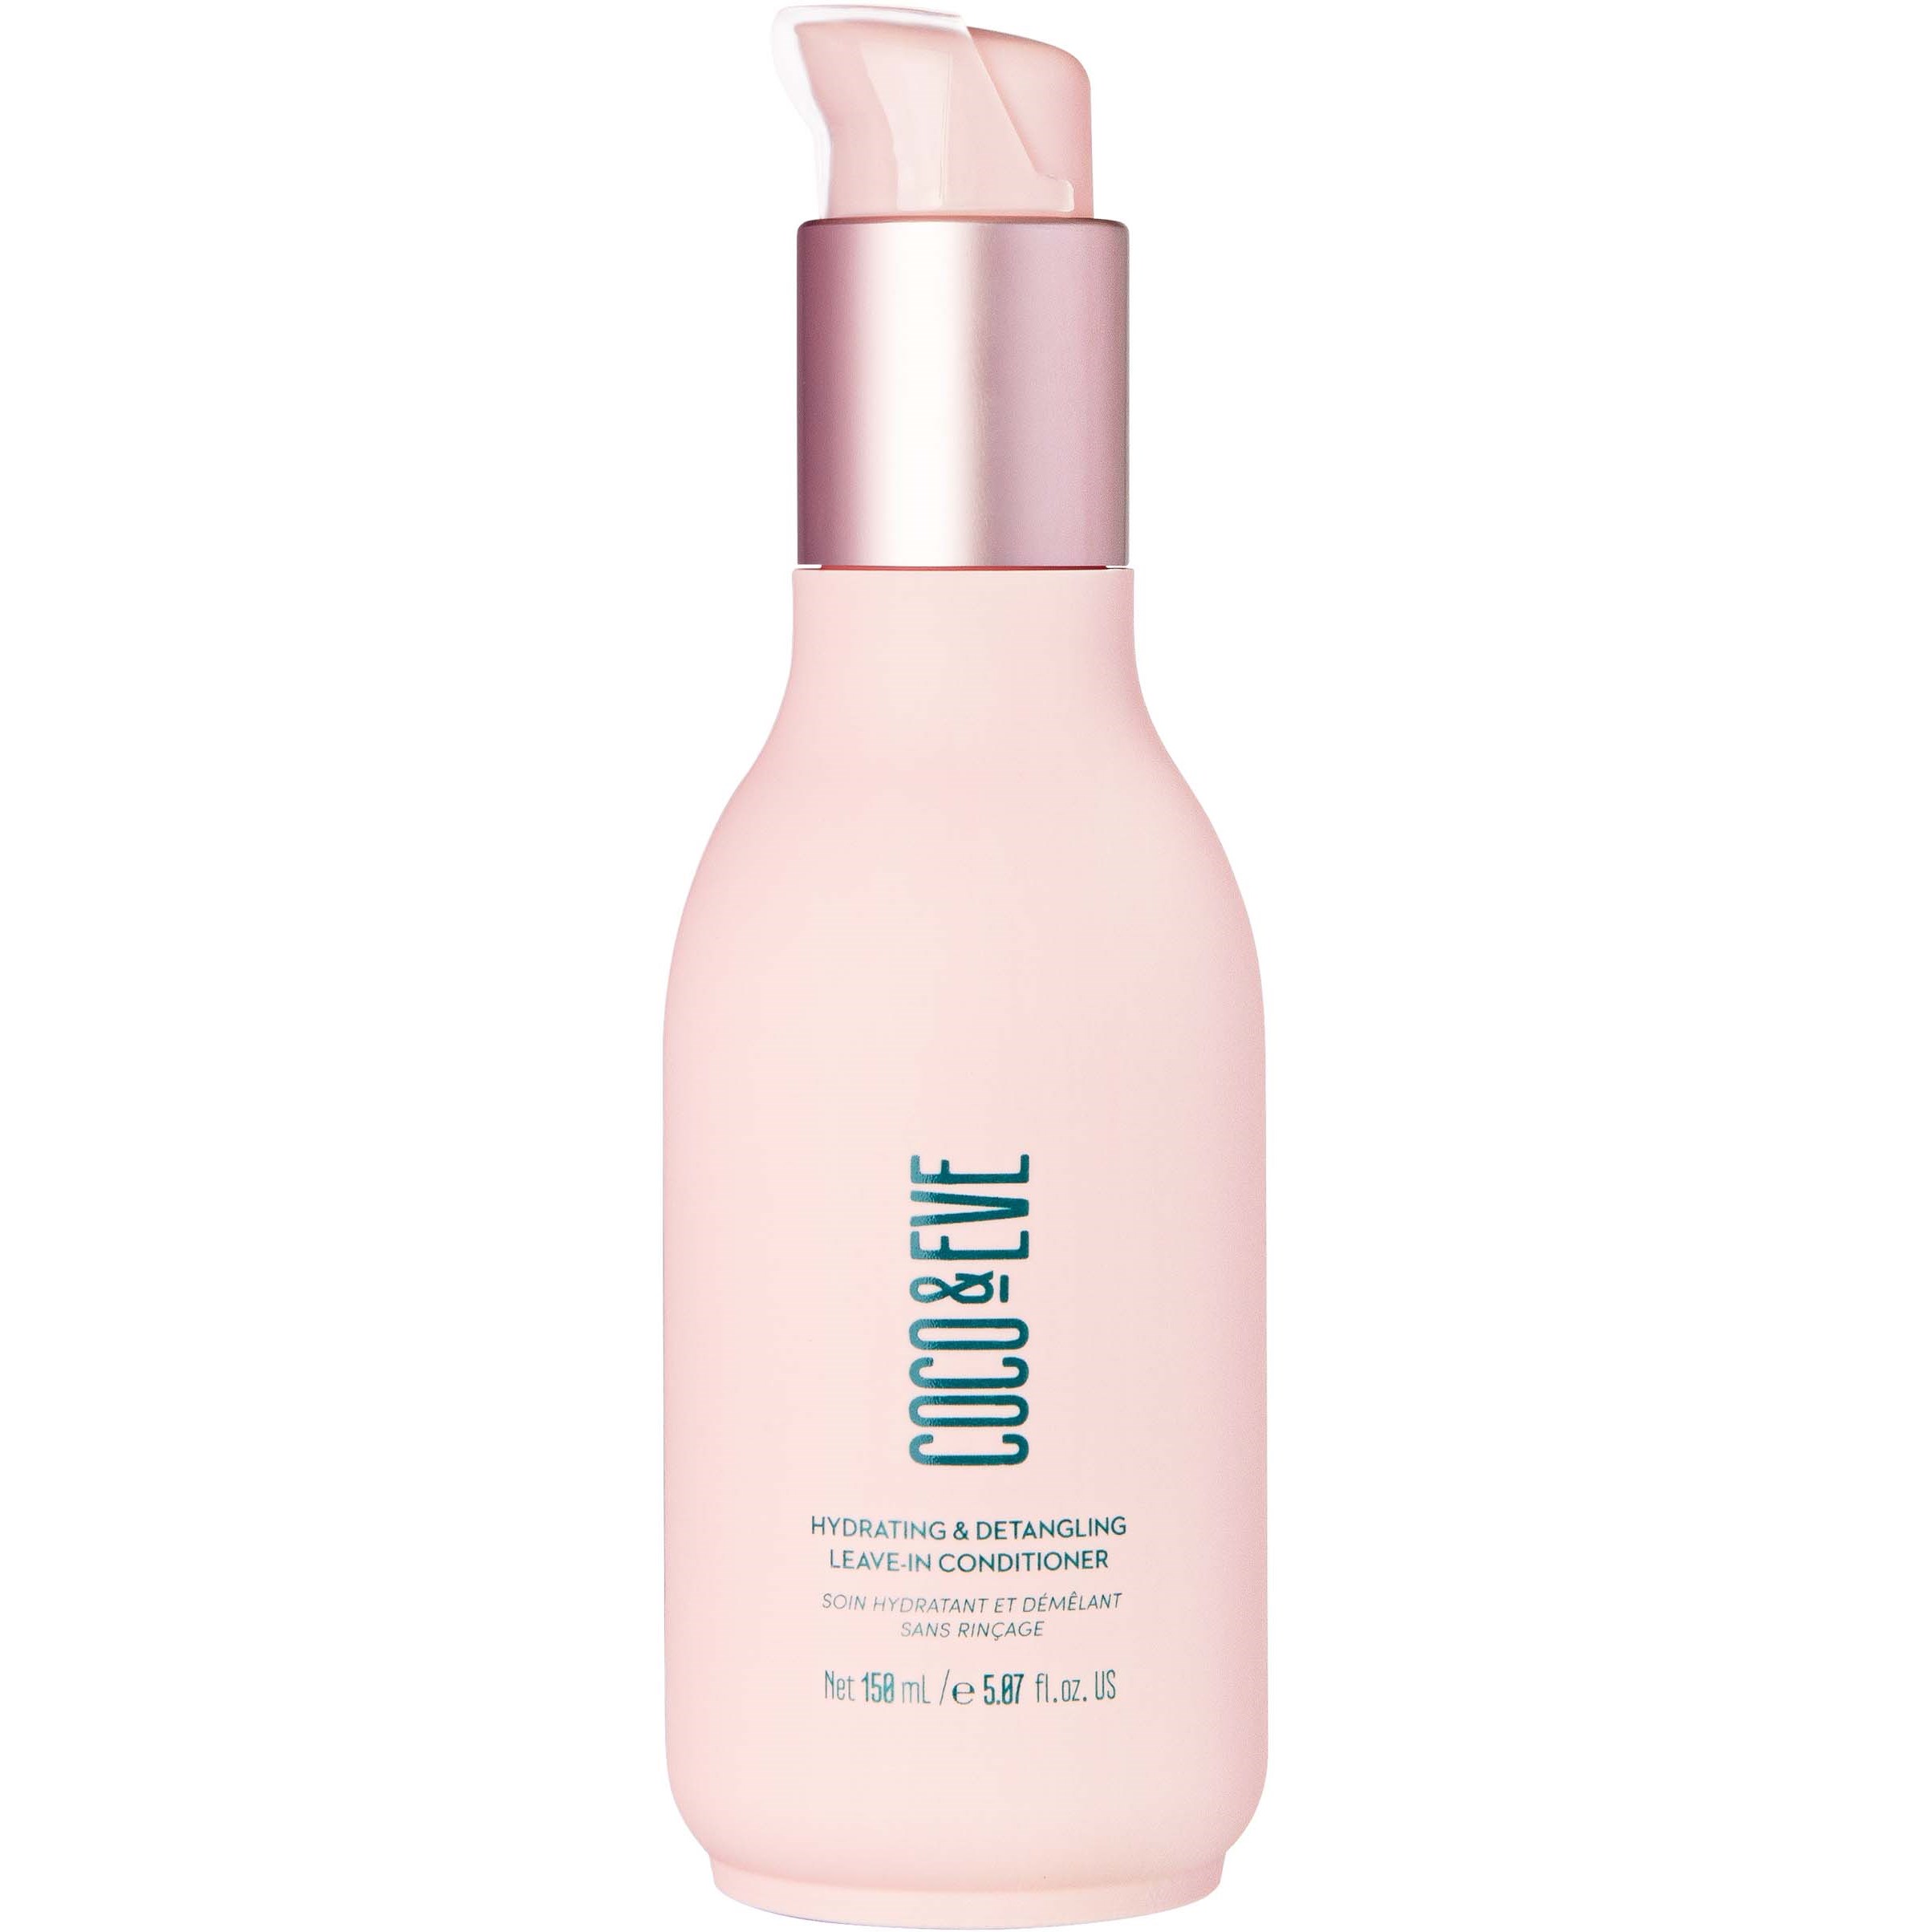 Coco & Eve Like a Virgin Hydrating & Detangling Leave-In Conditioner 1